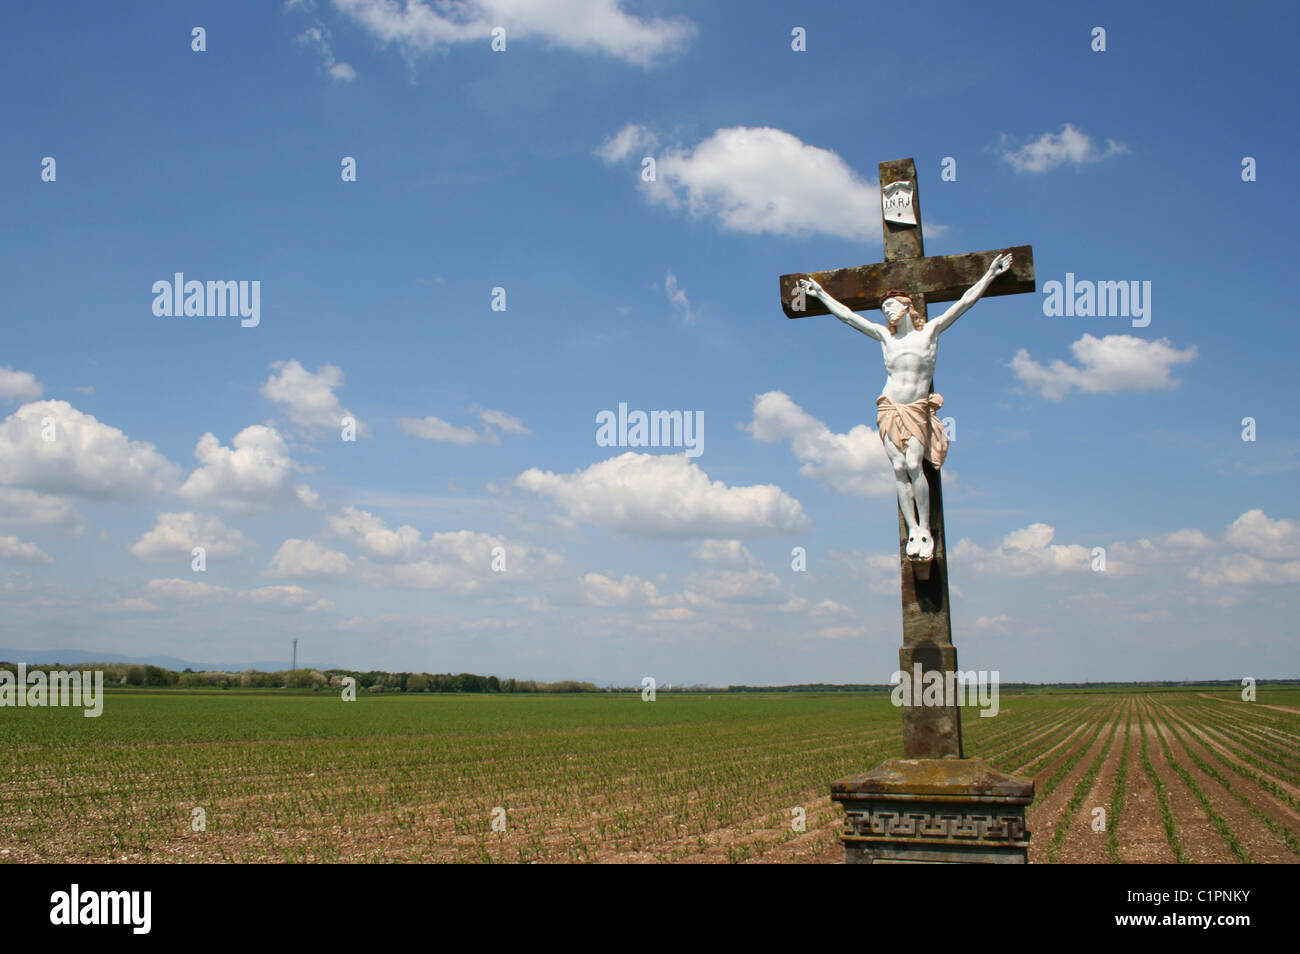 Alsace region, France. Statue of Jesus Christ on a stone cross stands in an empty field. Stock Photo